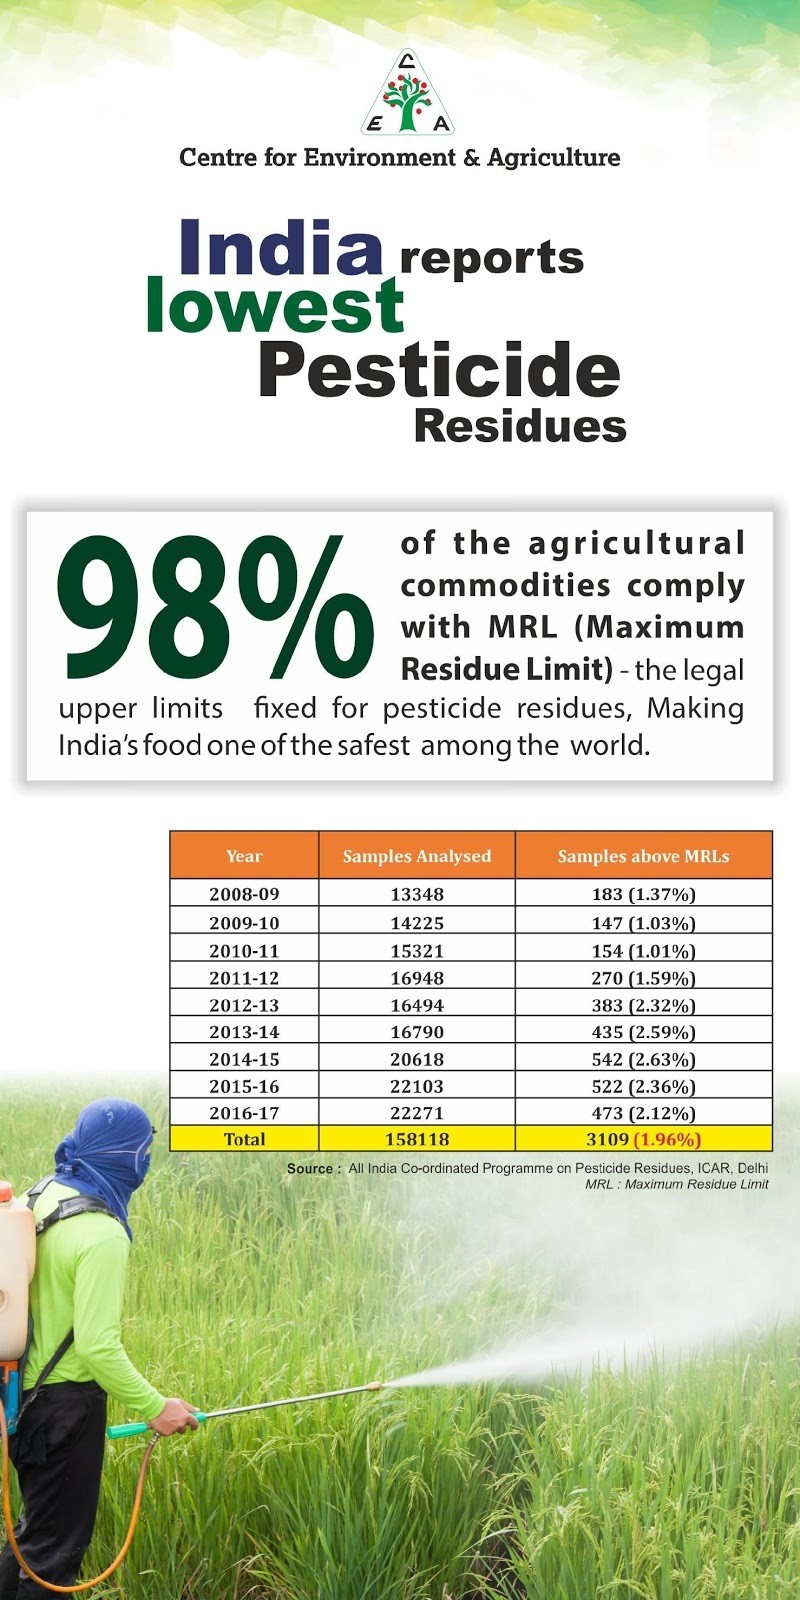 Poster on India’s Pesticide Residues Uses